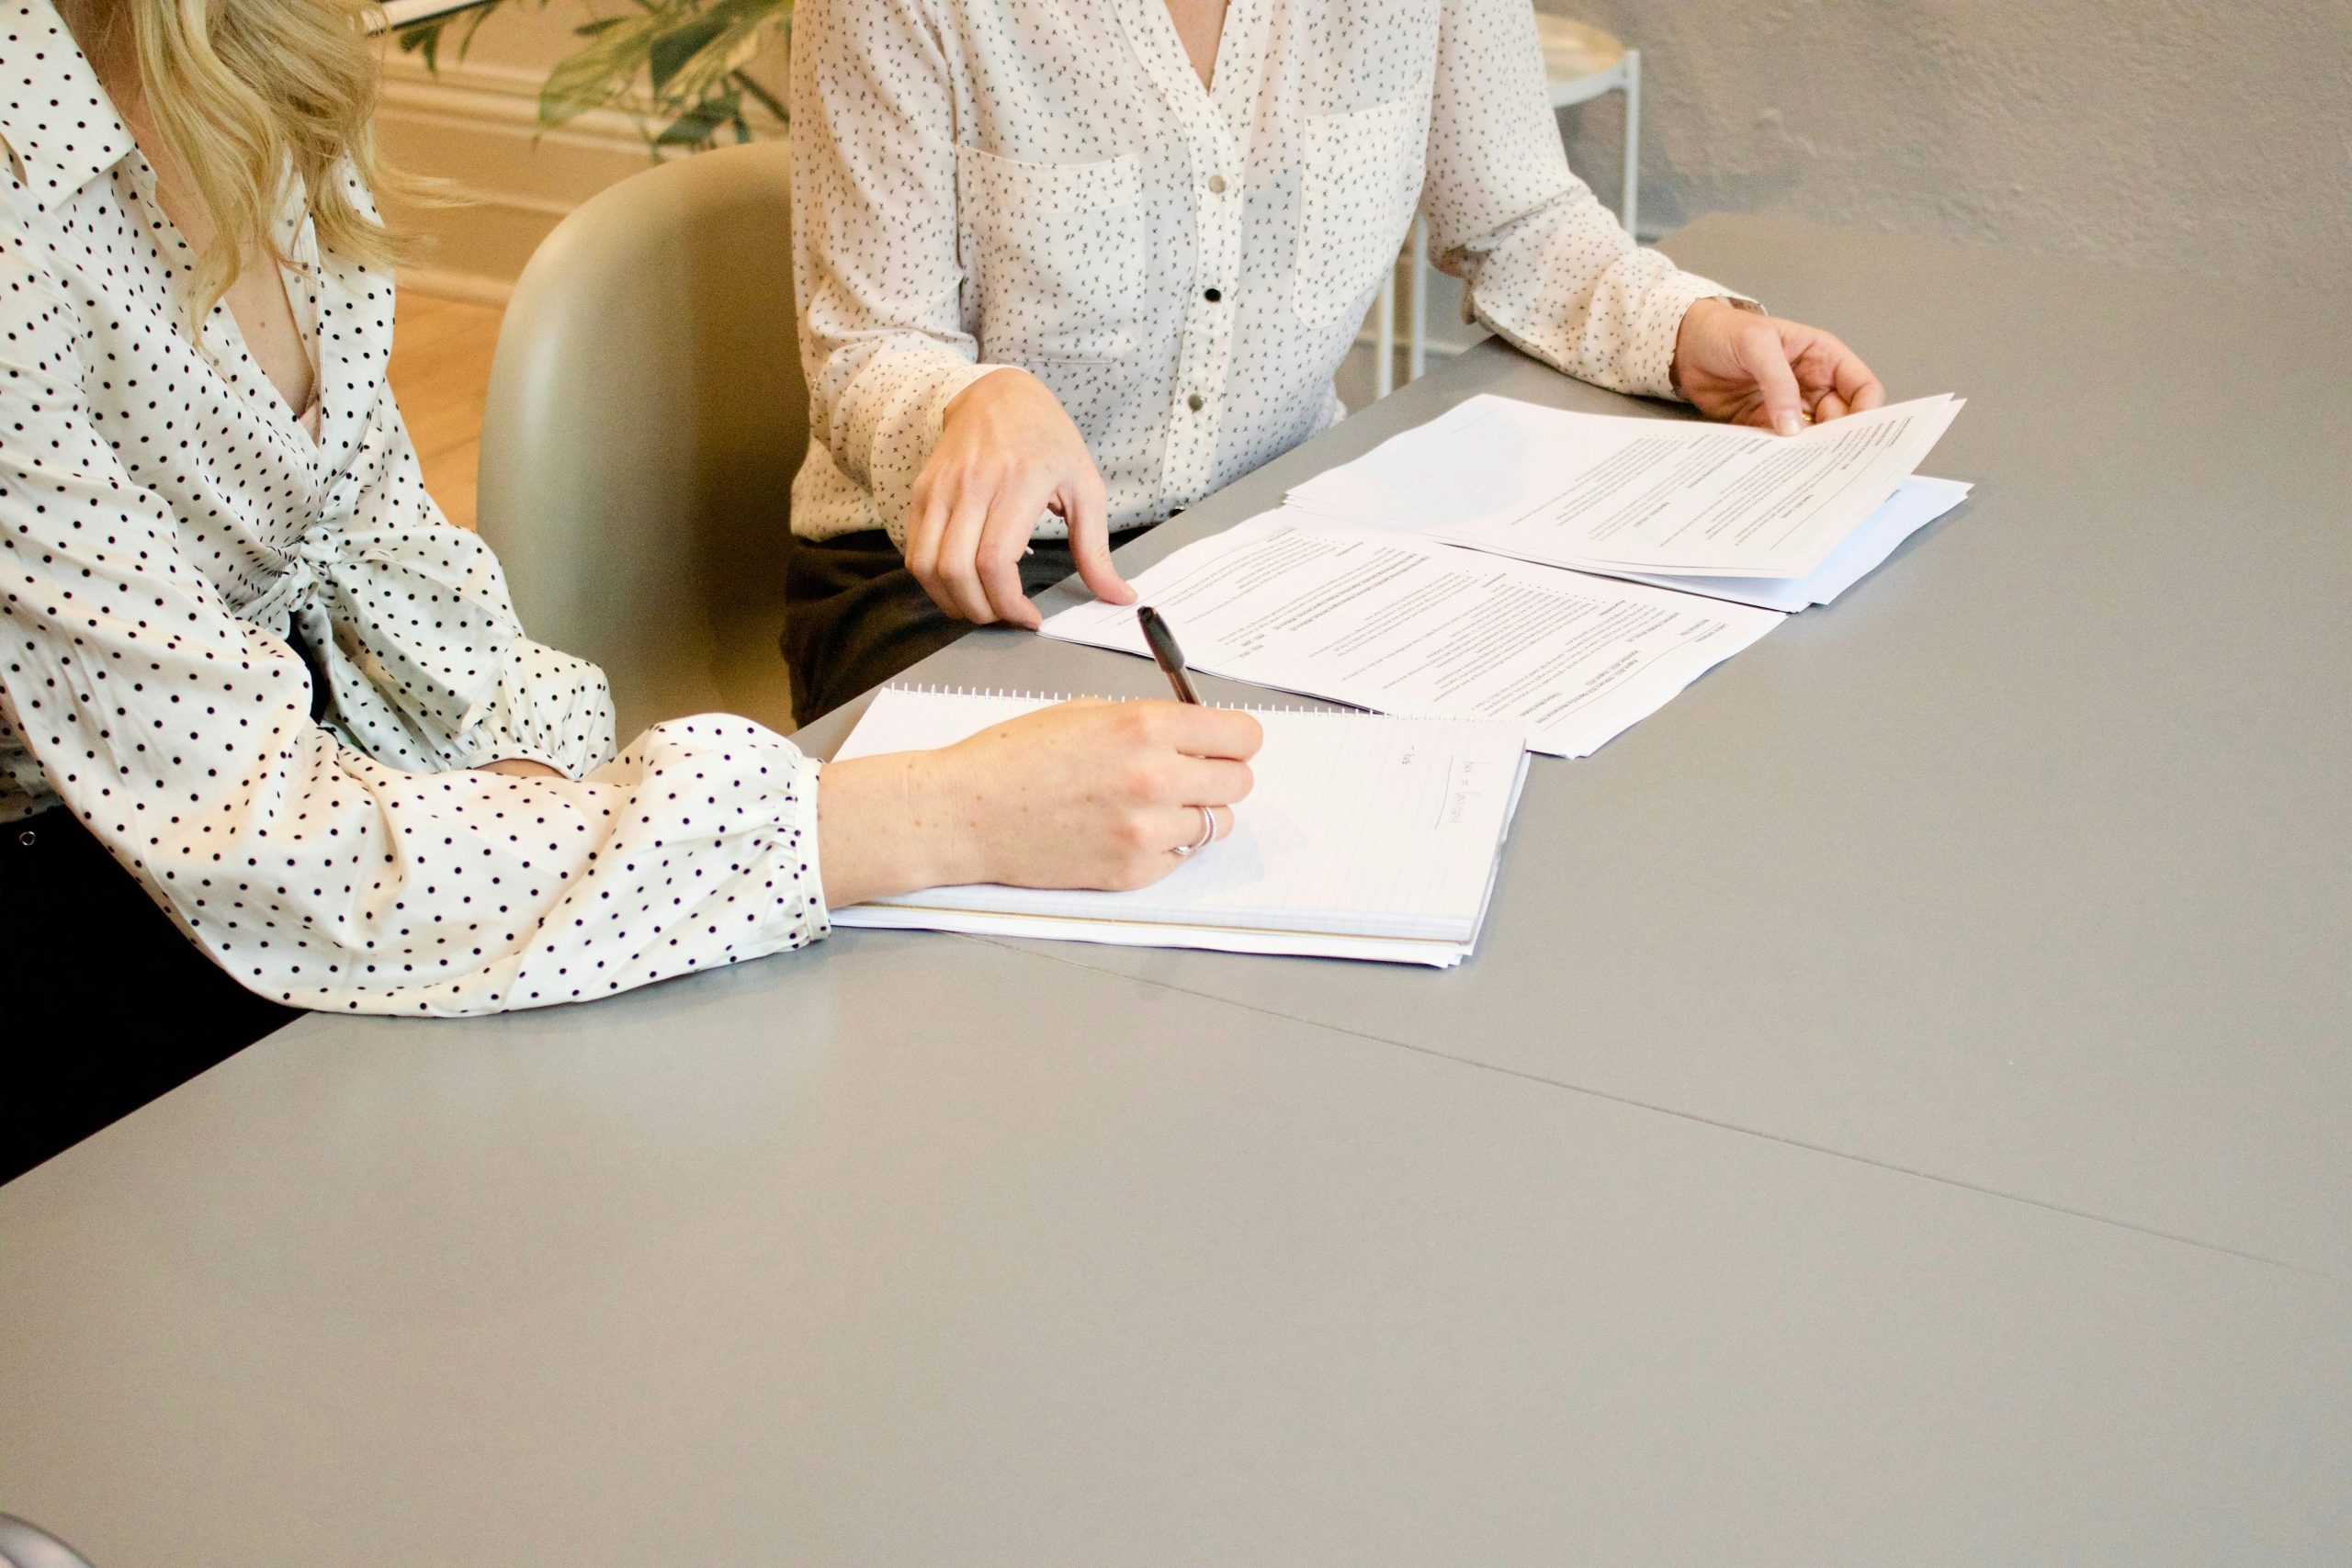 Two people sitting at a table filling out paperwork.